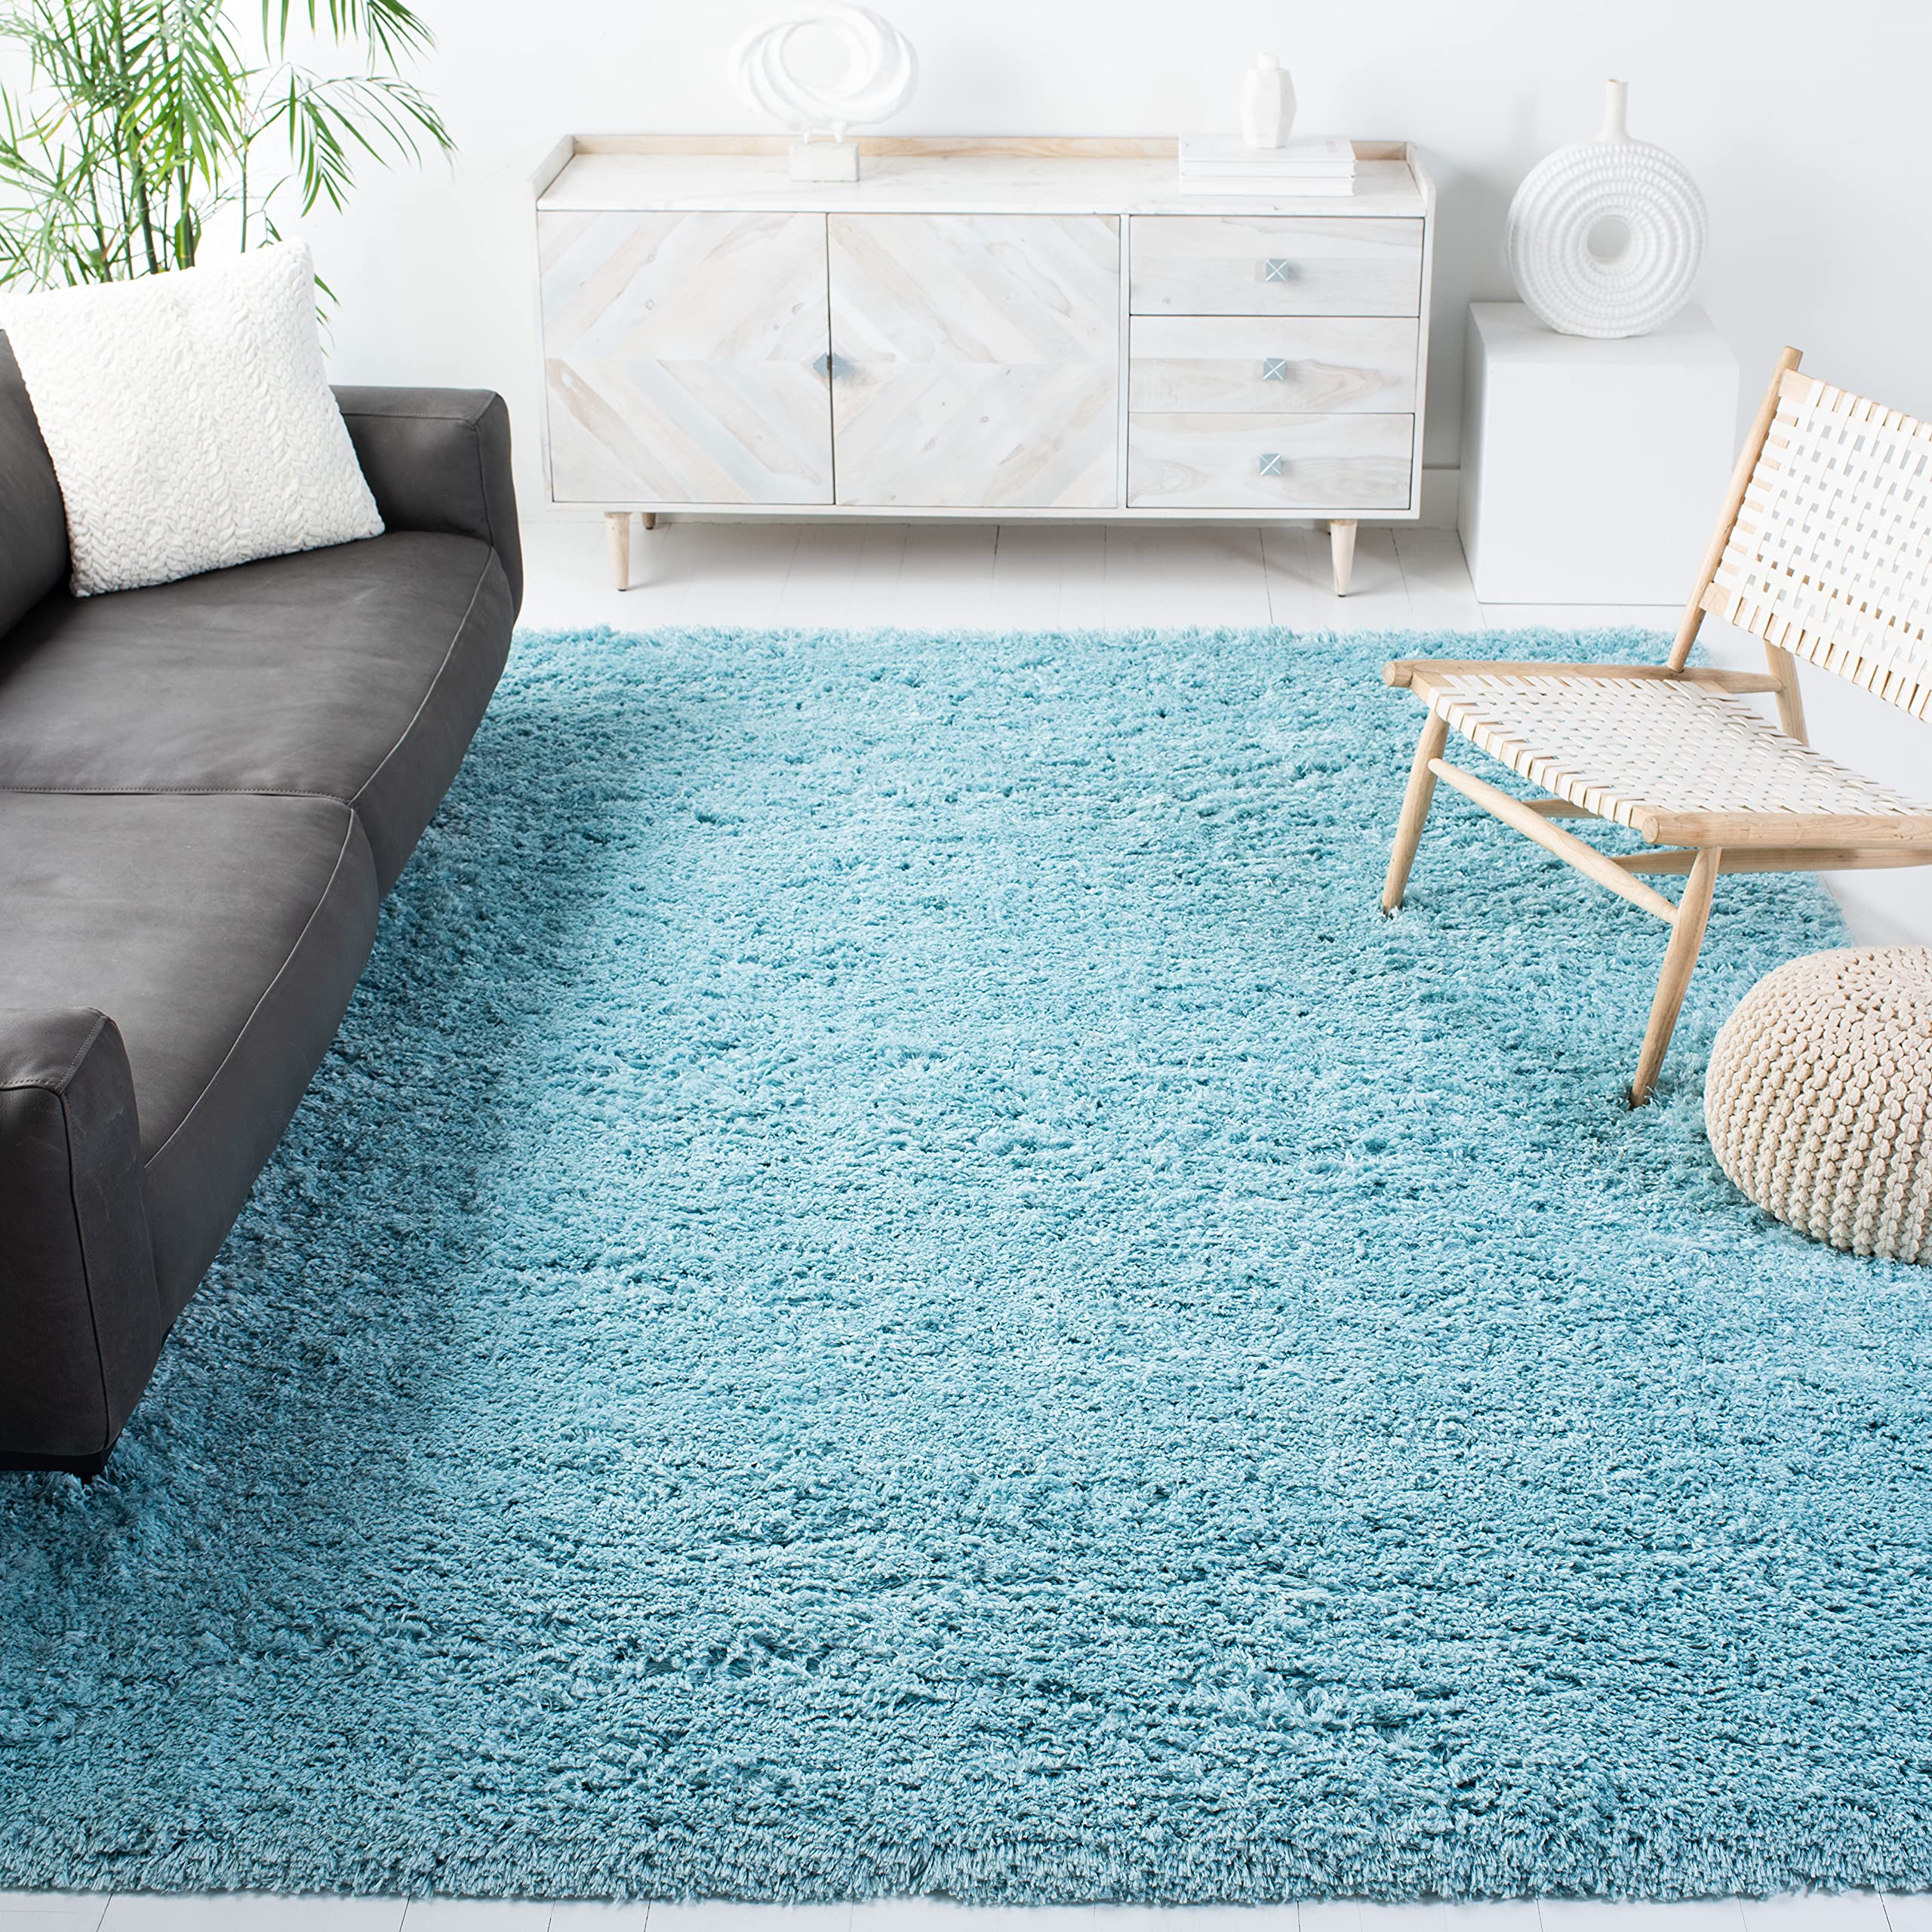 Safavieh Polar Shag Collection Area Rug - 10' x 14', Light Turquoise, Solid Glam Design, Non-Shedding & Easy Care, 3-inch Thick Ideal for High Traffic Areas in Living Room, Bedroom (PSG800T)